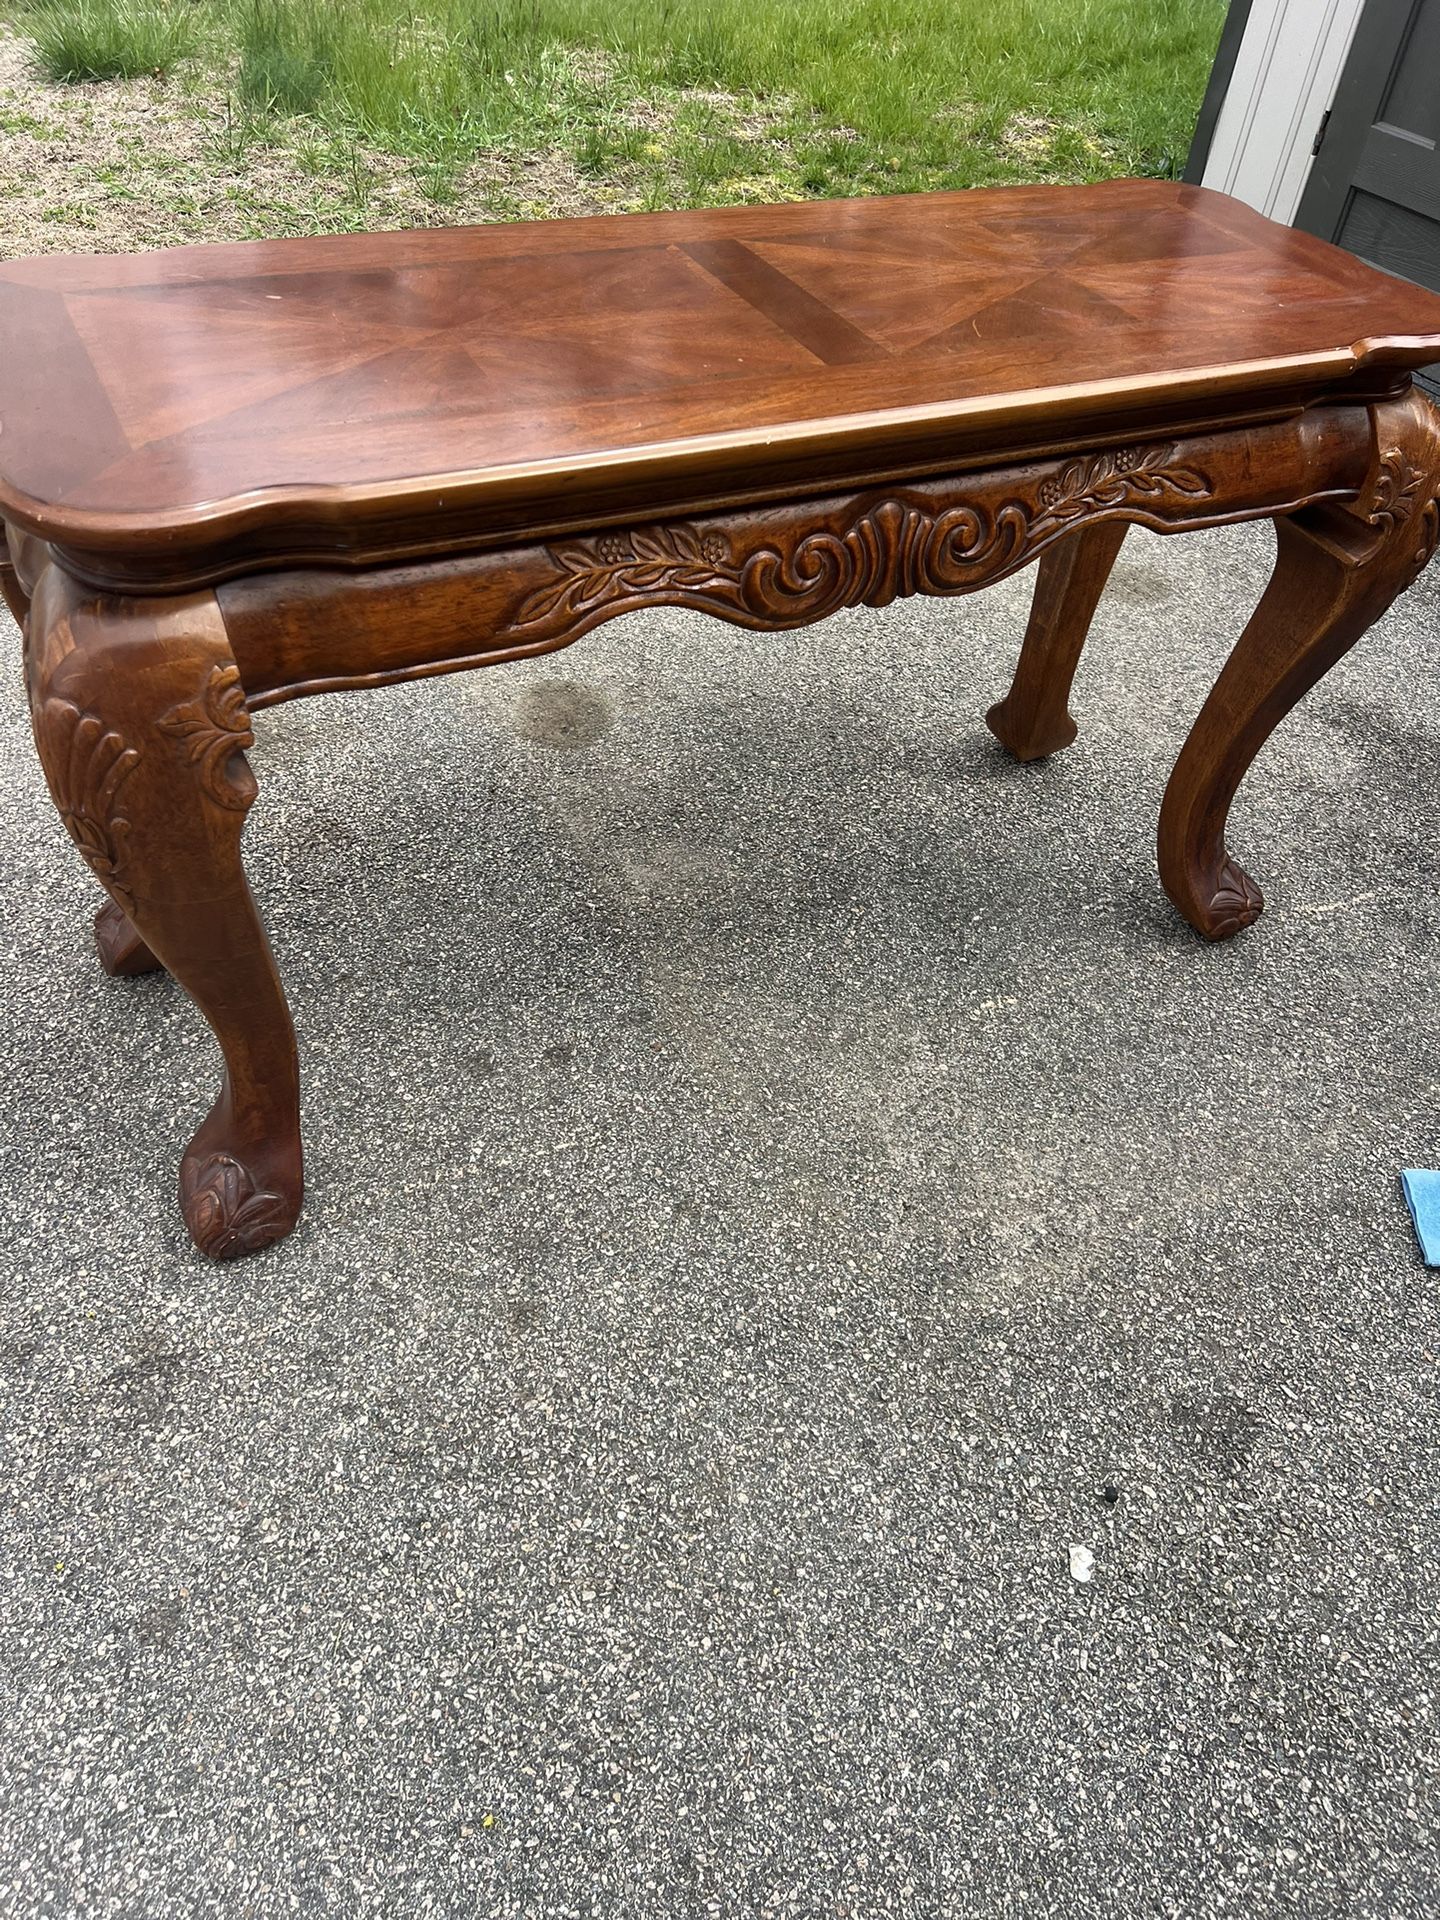 Sofa Table In Great Condition Mahogany Wood 